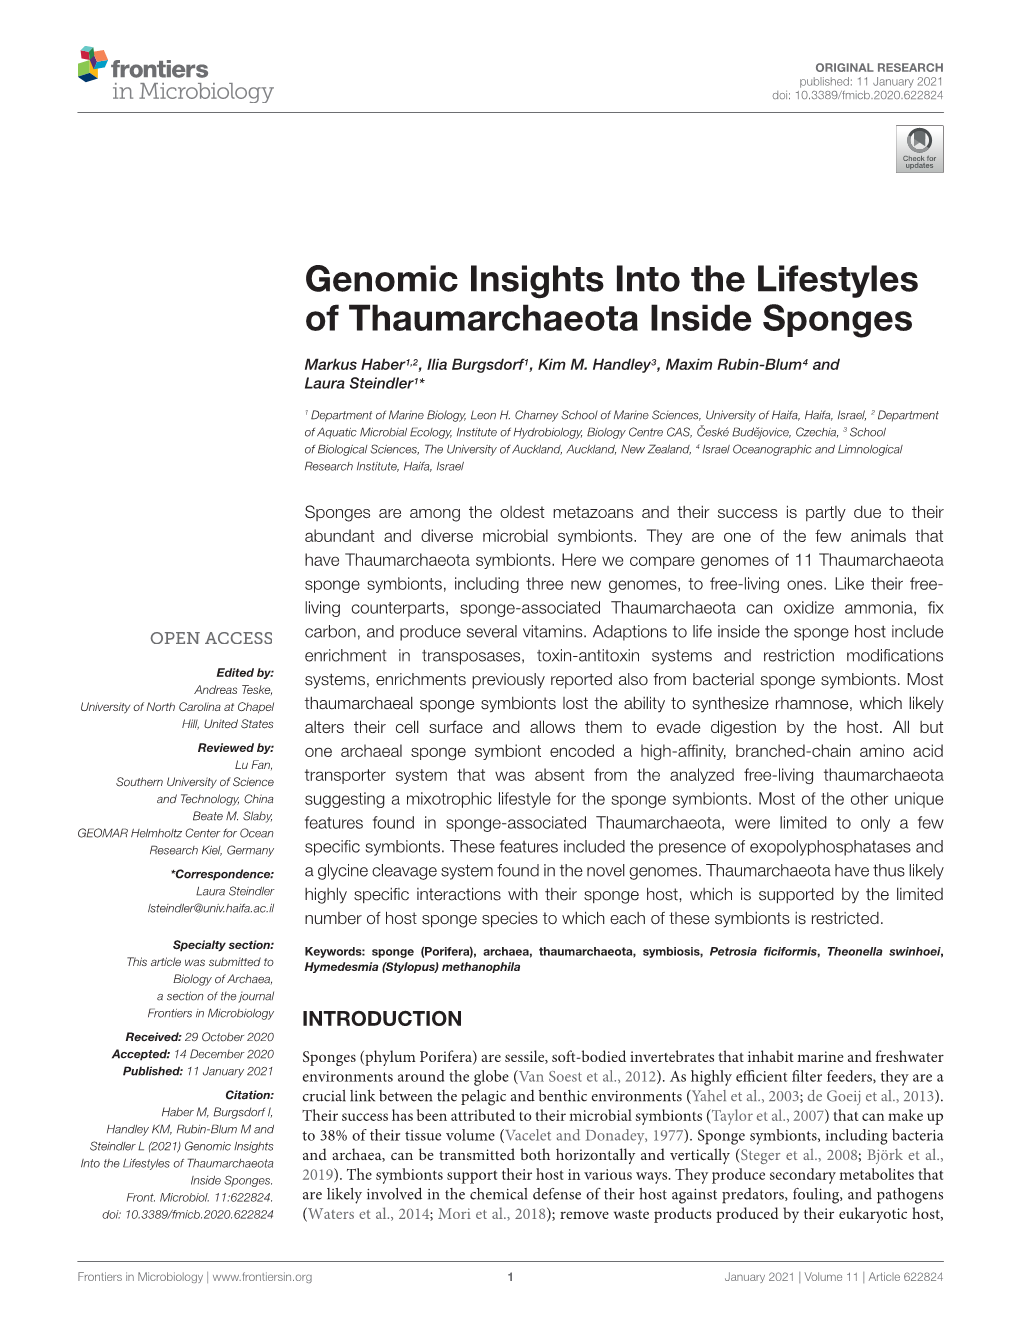 Genomic Insights Into the Lifestyles of Thaumarchaeota Inside Sponges